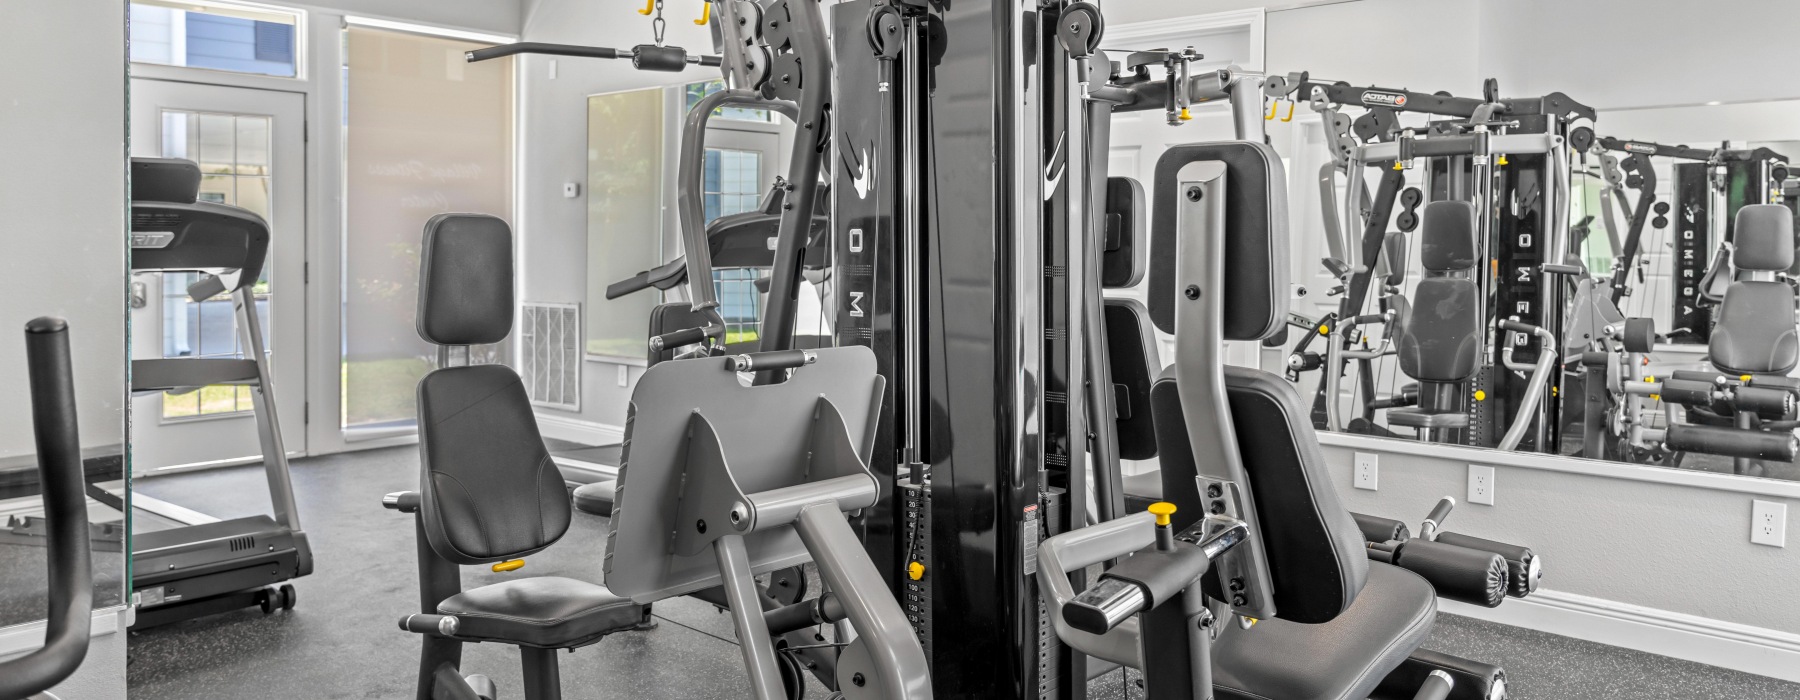 Fully equipped fitness center with weight training and cardio. 